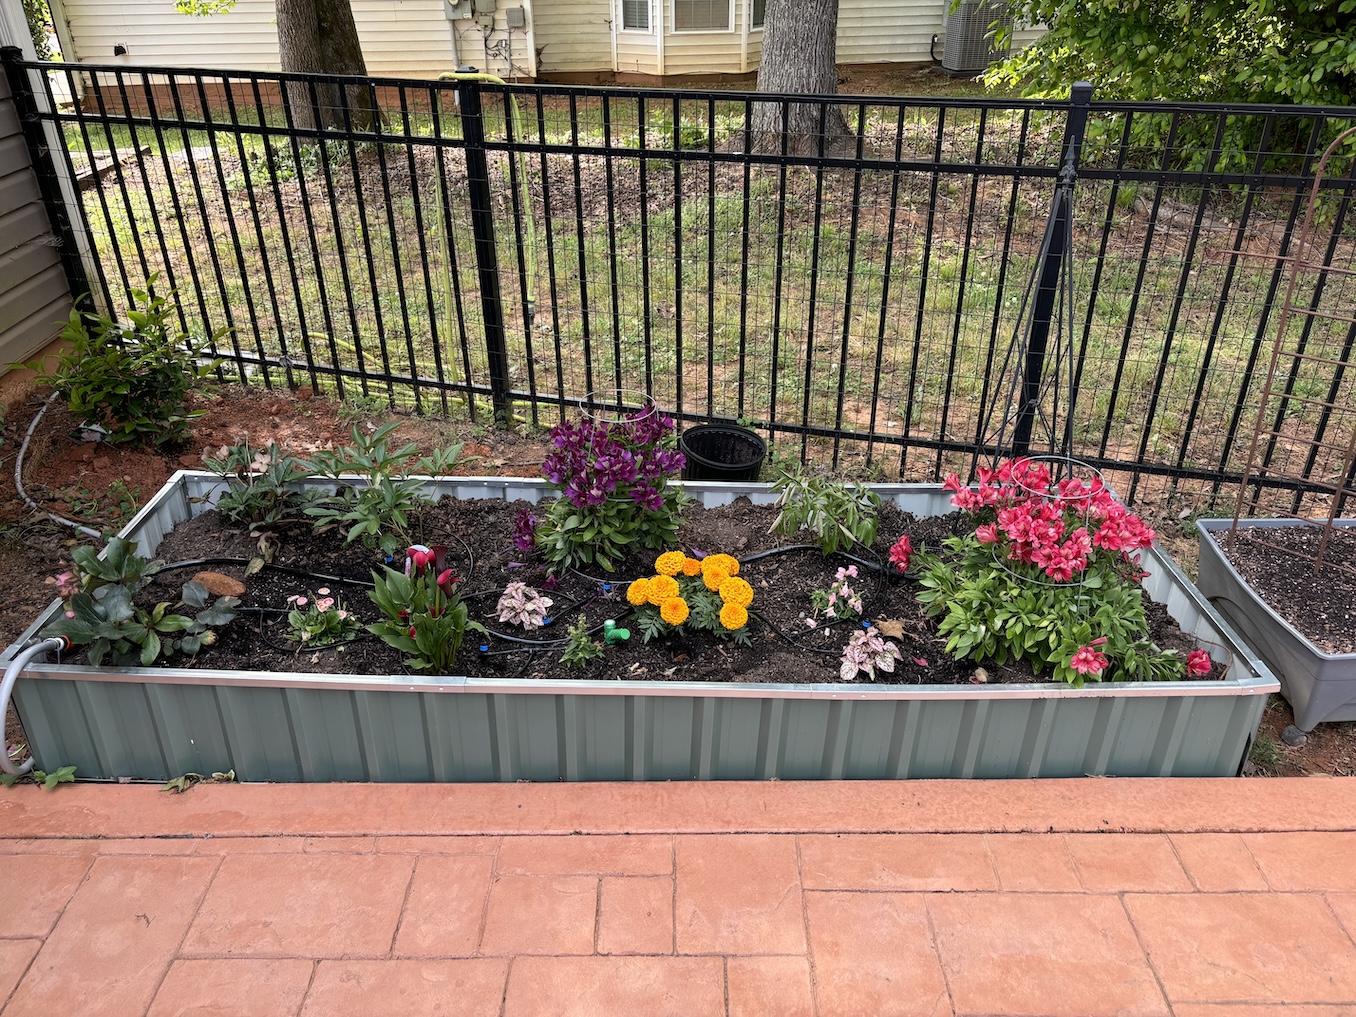 Our raised flower bed